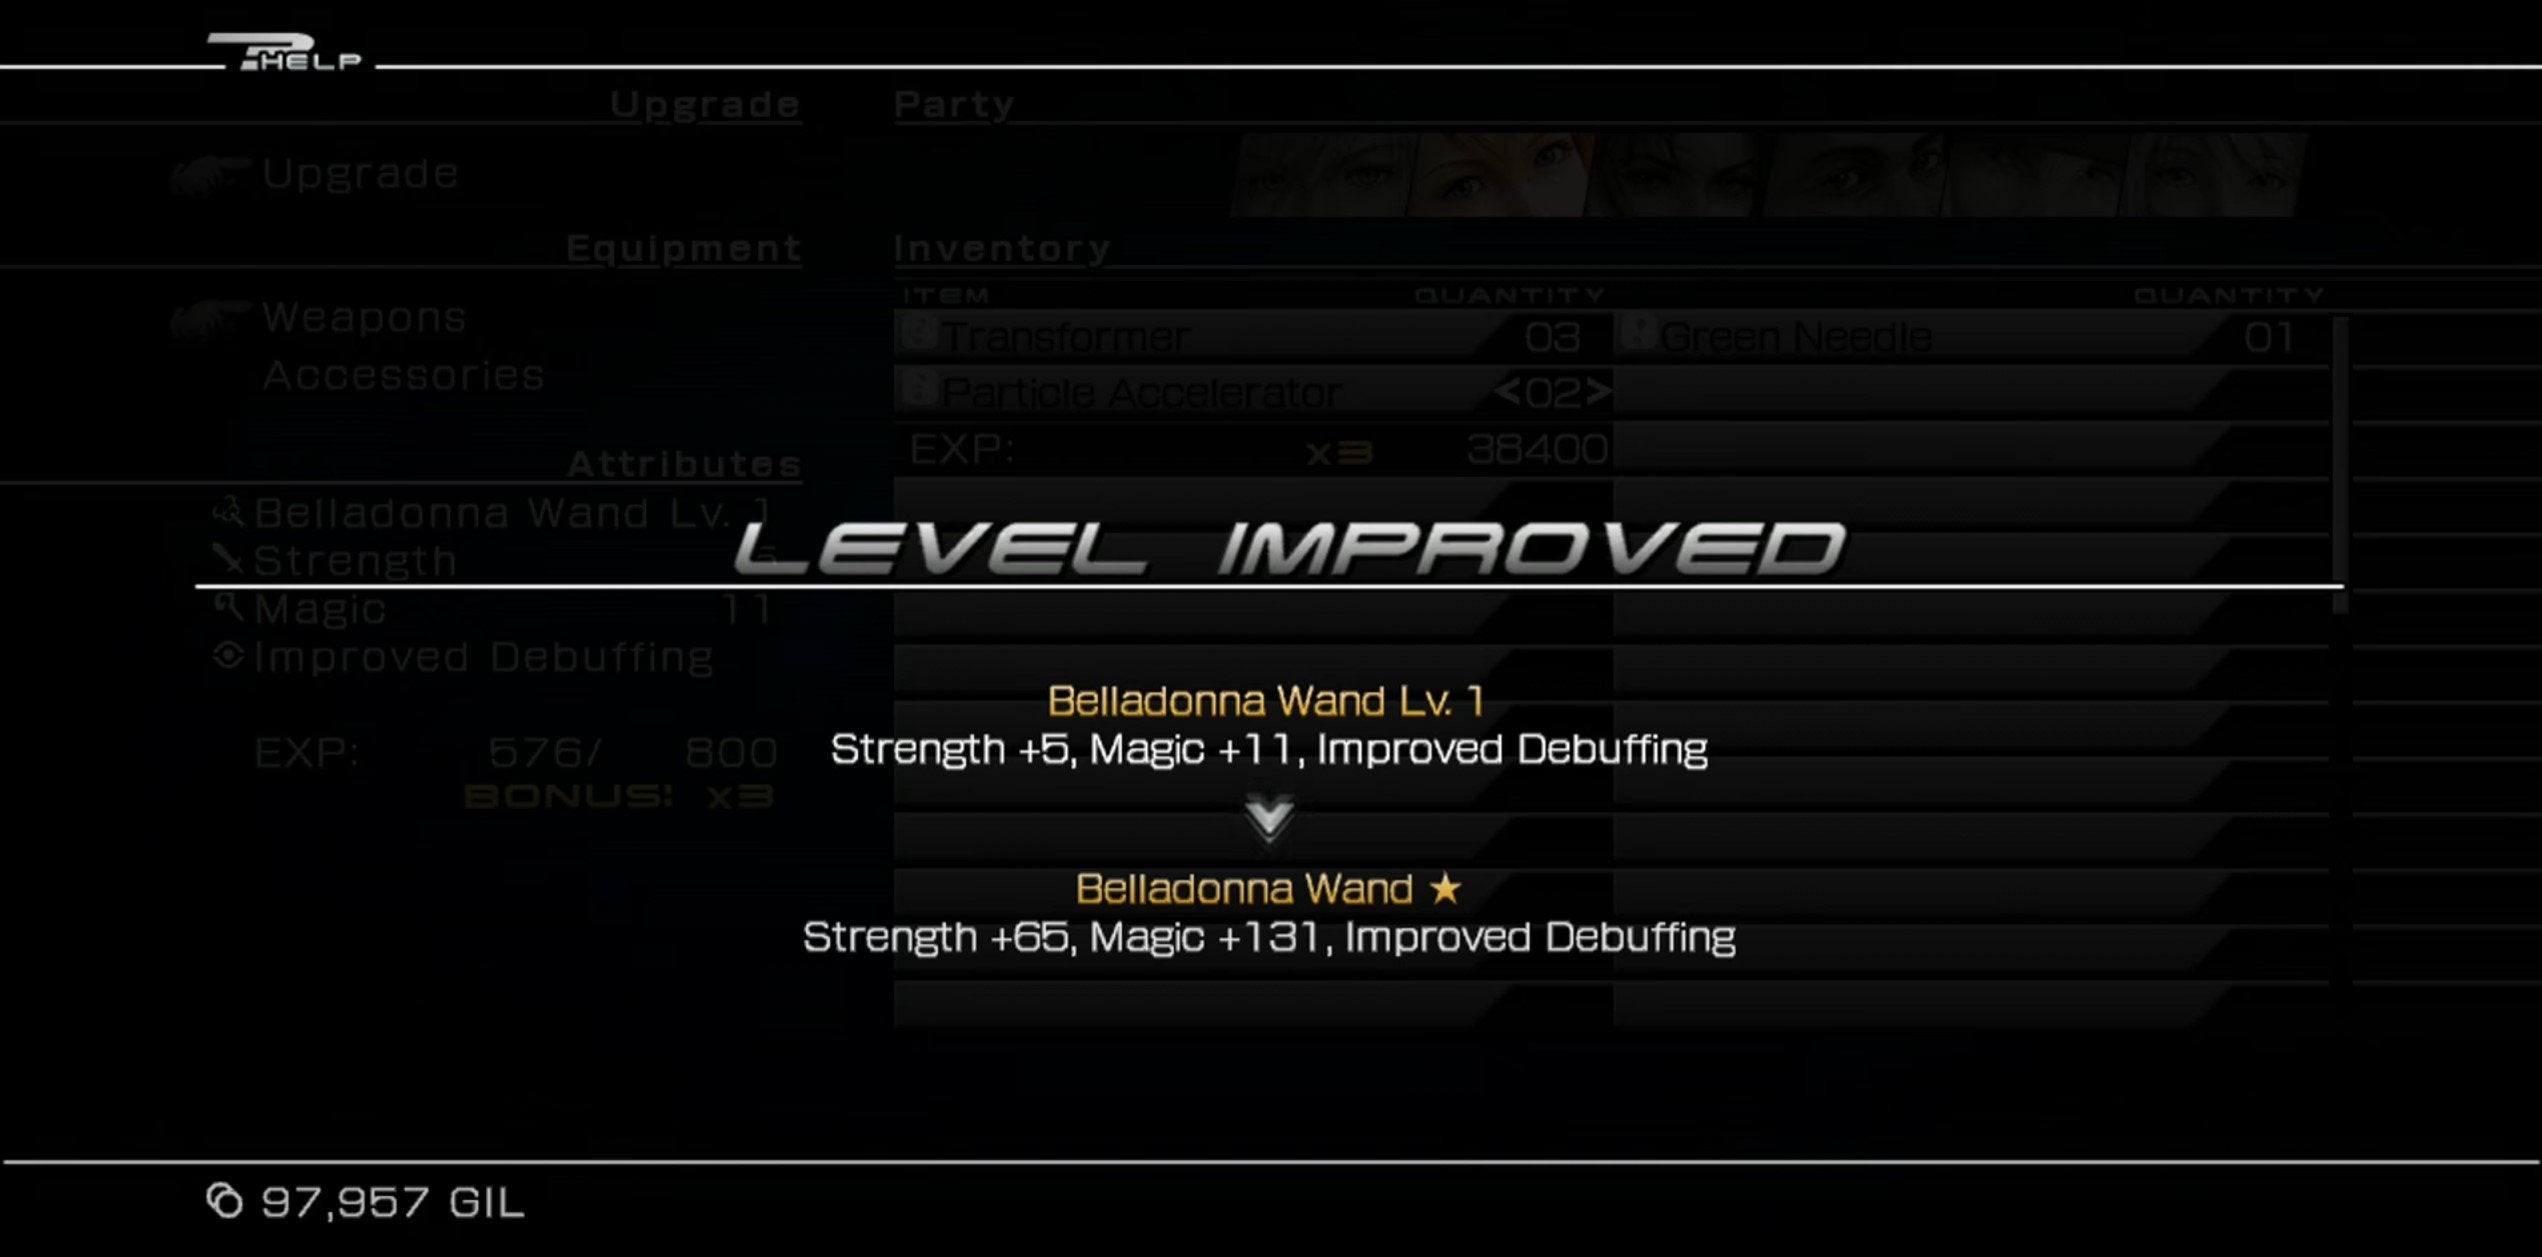 The results screen for upgrading equipment in Final Fantasy XIII.